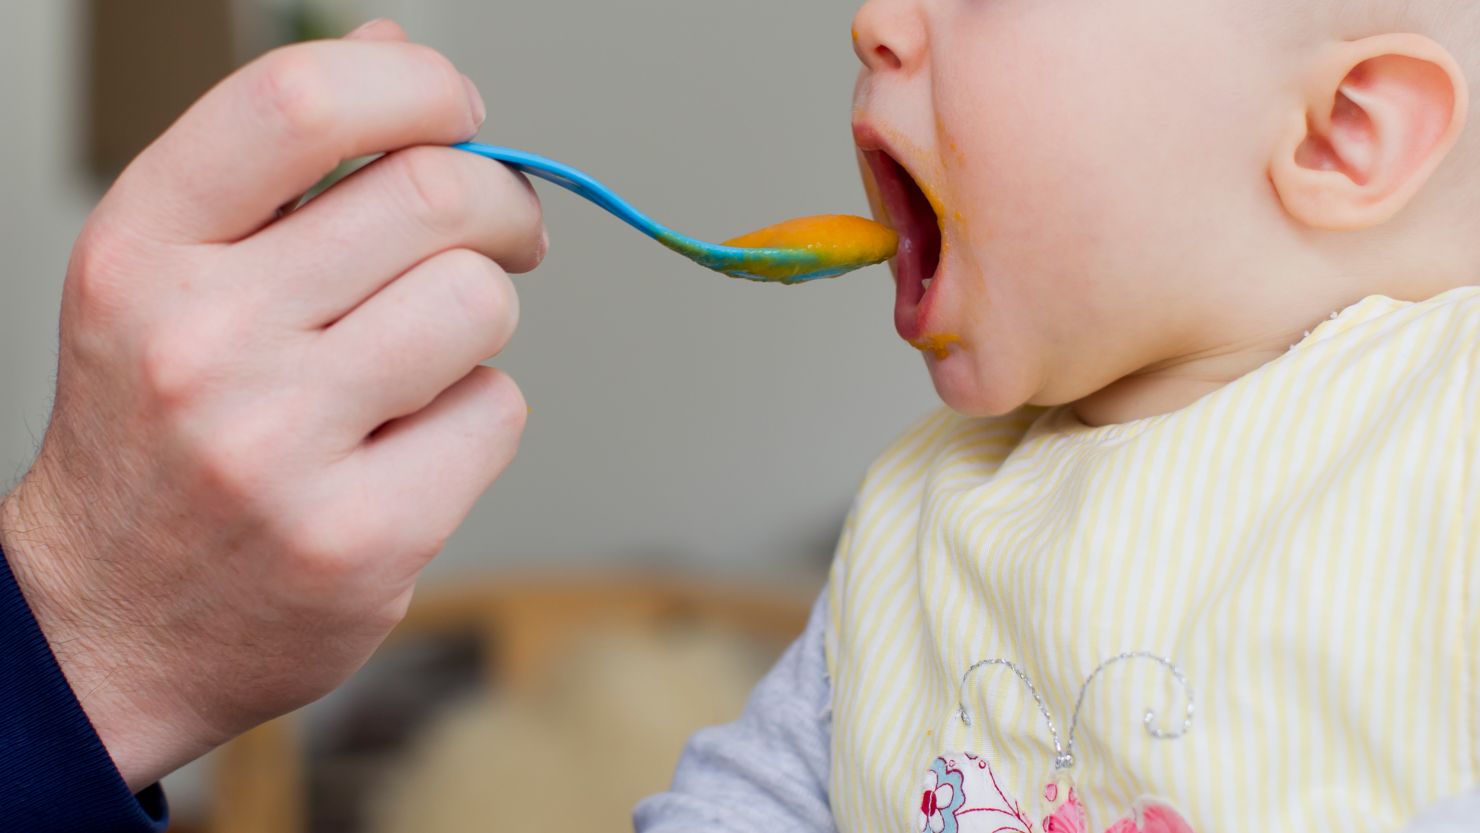 Reports have detailed concerning levels of contaminants in some foods manufactured for babies and toddlers.